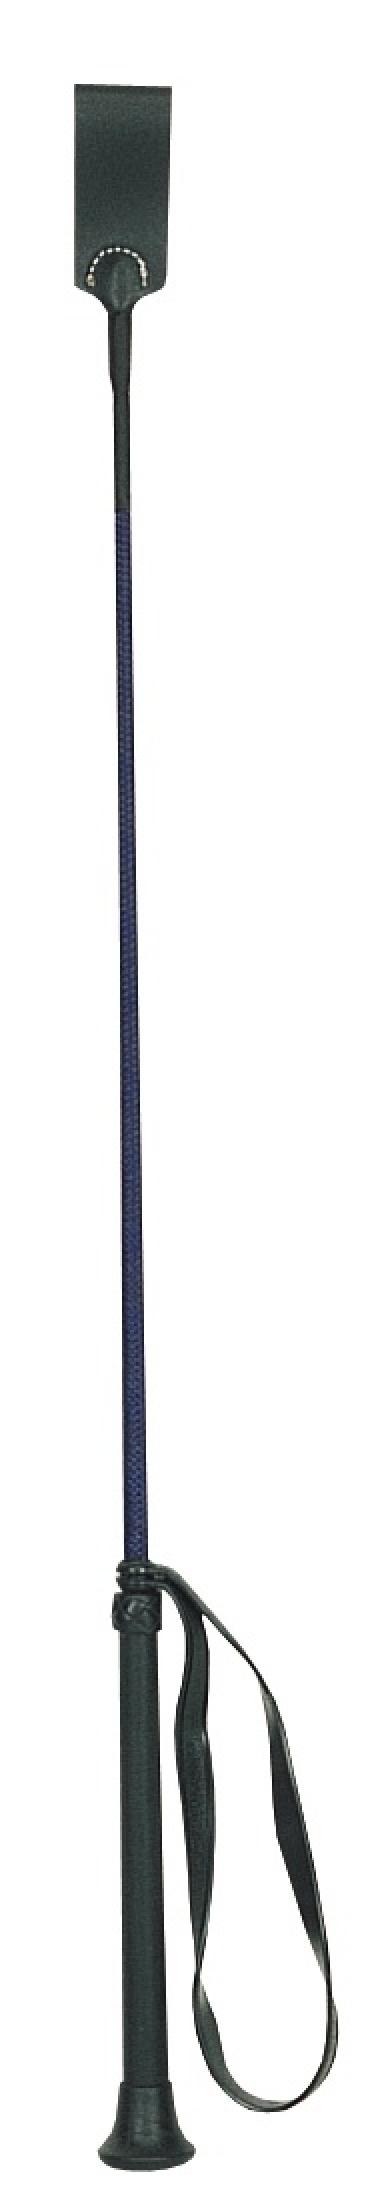 Riding Crop with PVC Handle, 24"